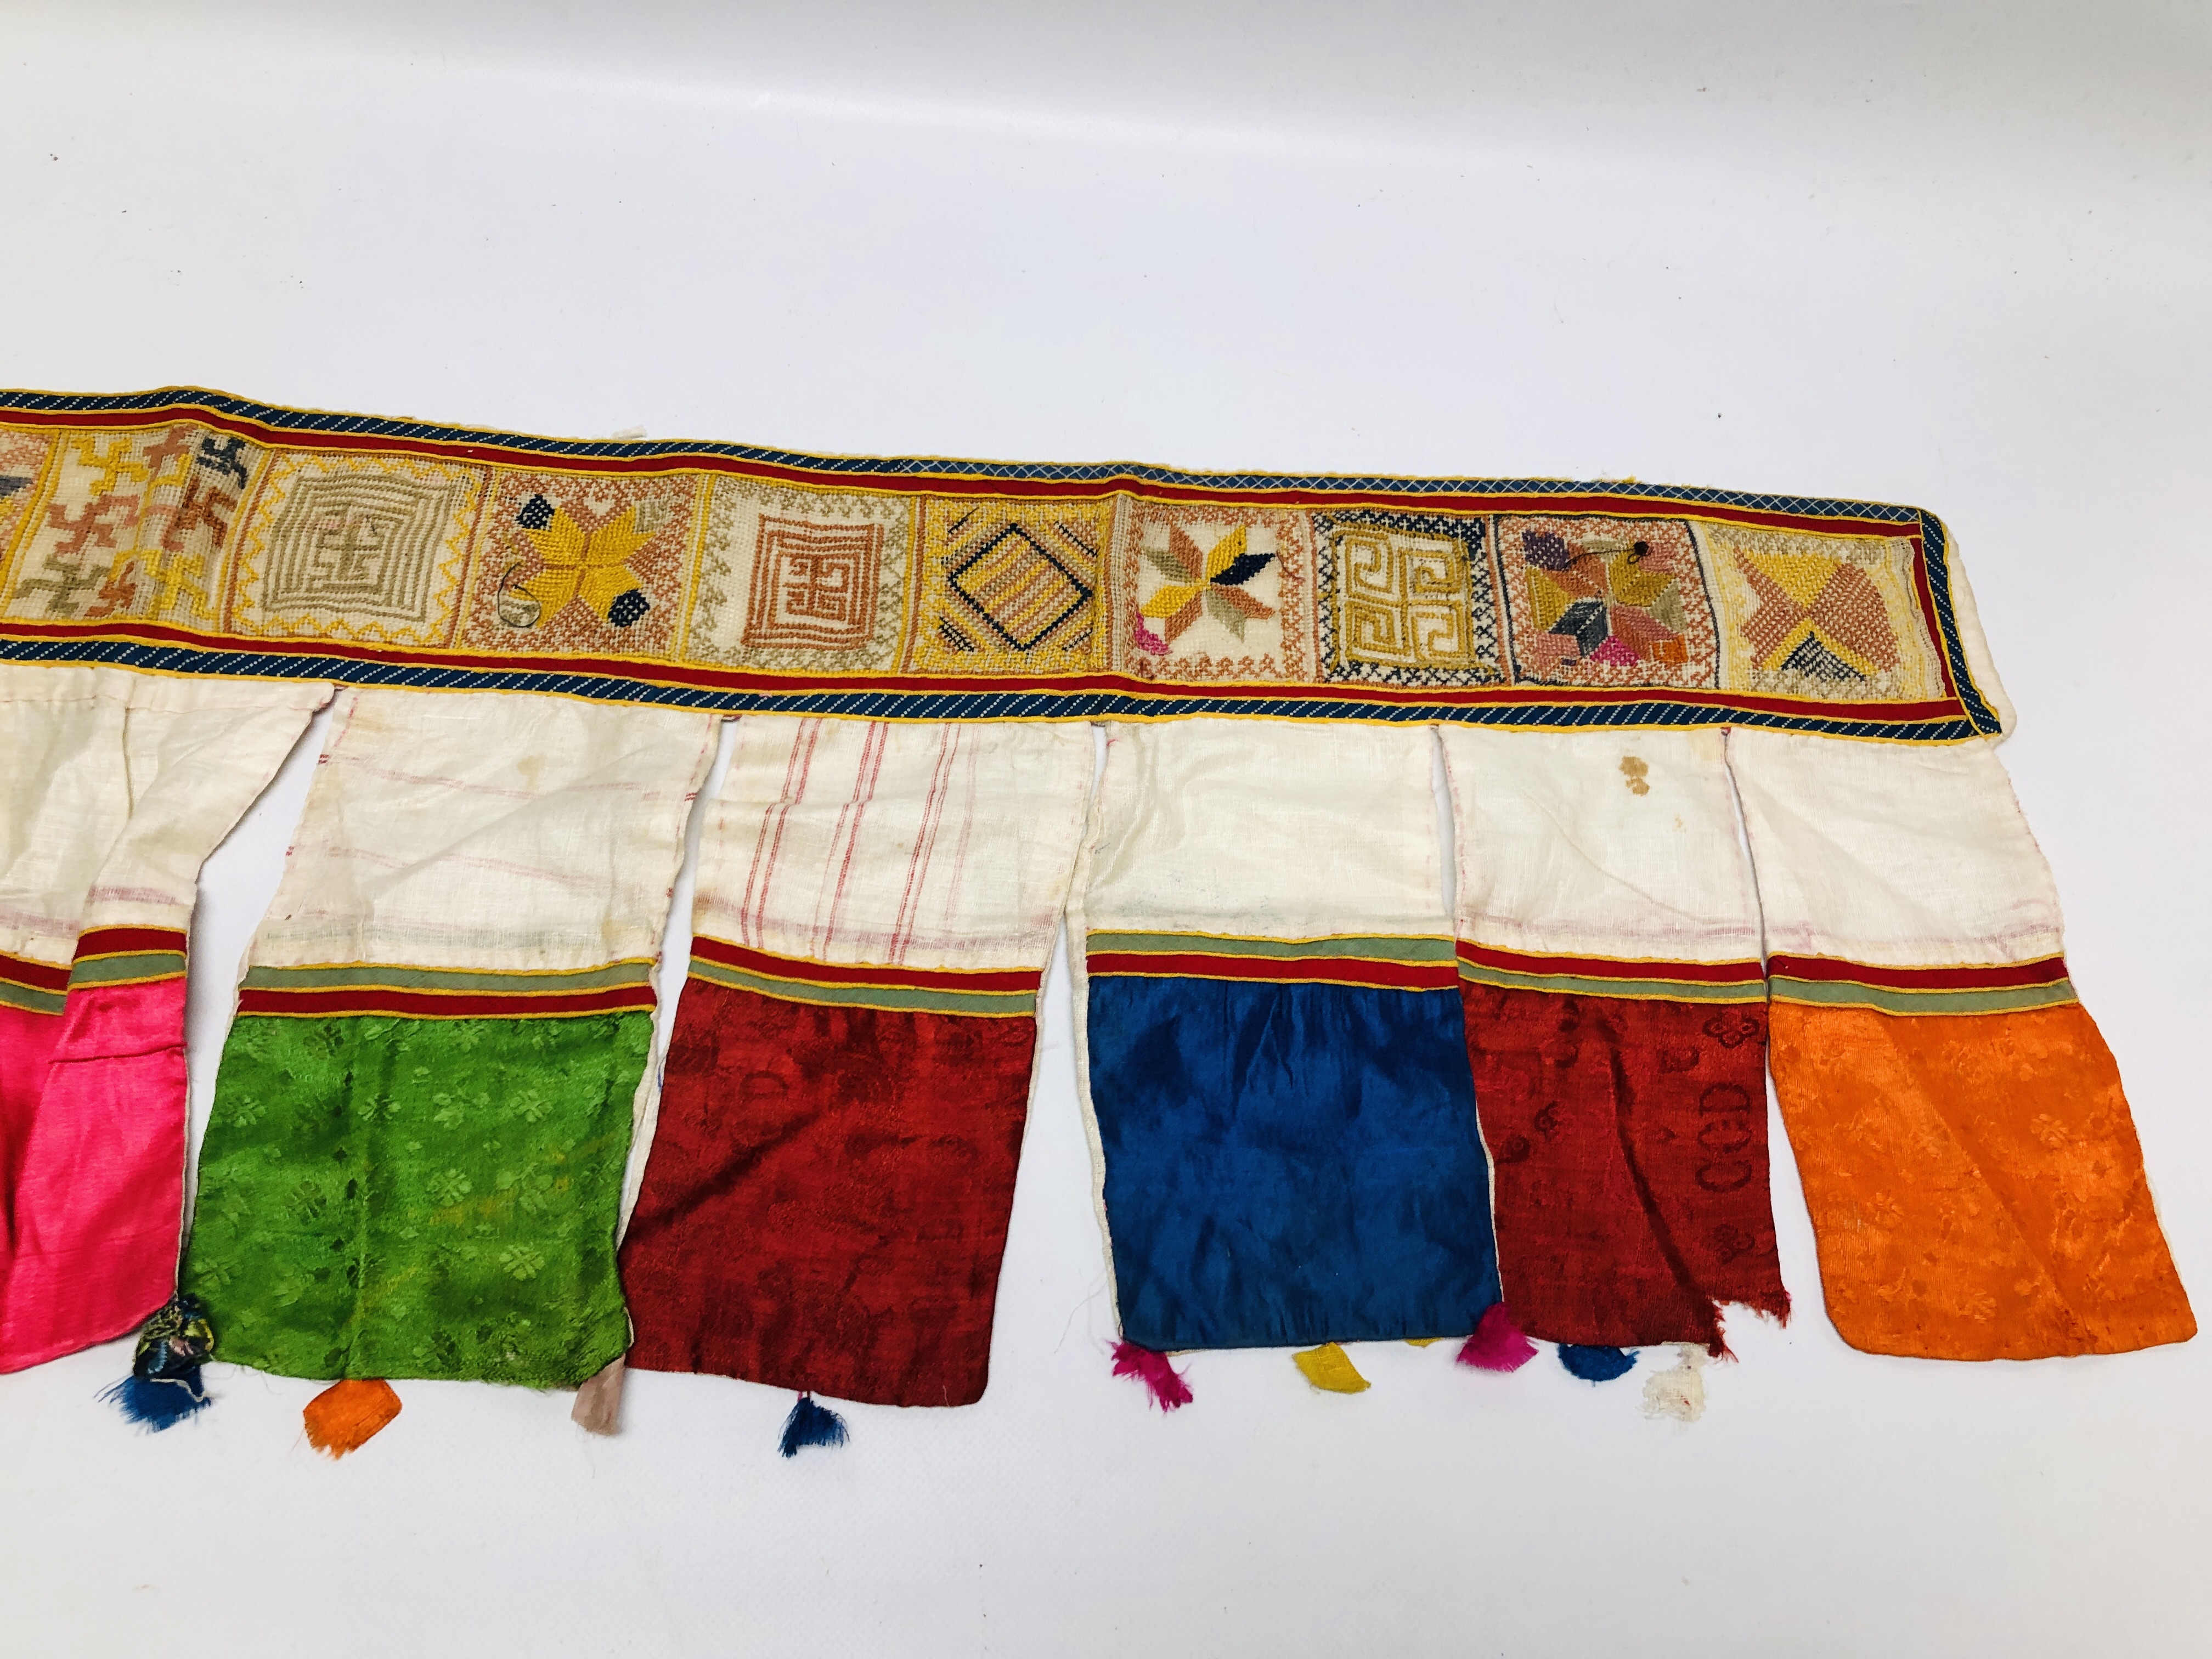 A HANDMADE ETHNIC TRIBAL SILK AND EMBROIDERED DOOR / WINDOW HANGING. - Image 4 of 5